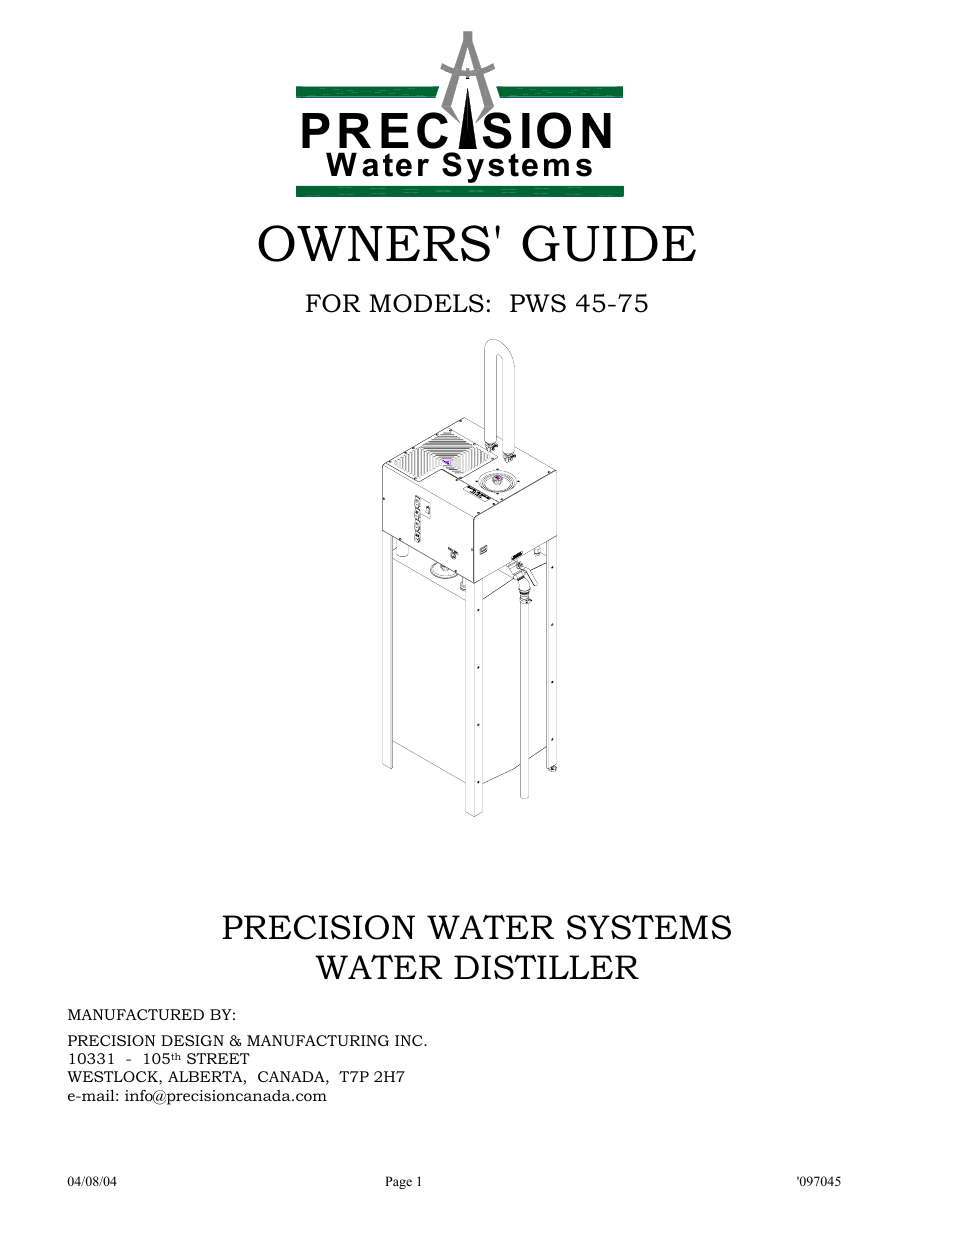 Precision-PWS 45-75  OWNERS GUIDE